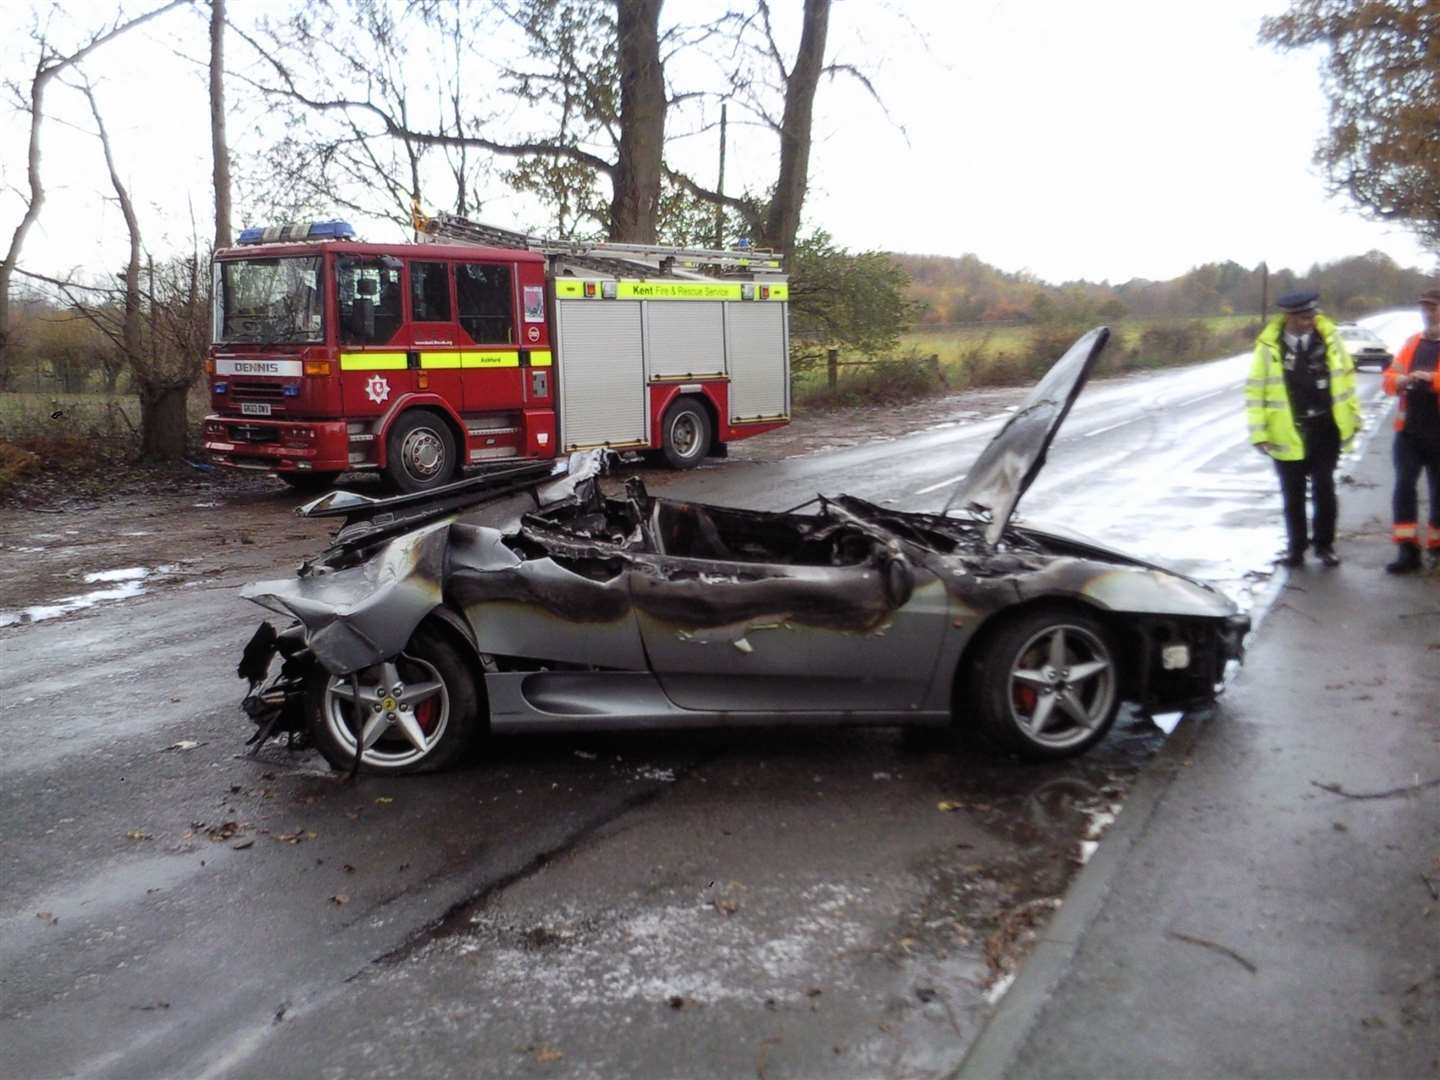 Fire crews at the scene after the Ferrari ploughed into the cafe. Picture: Ashford Borough Council